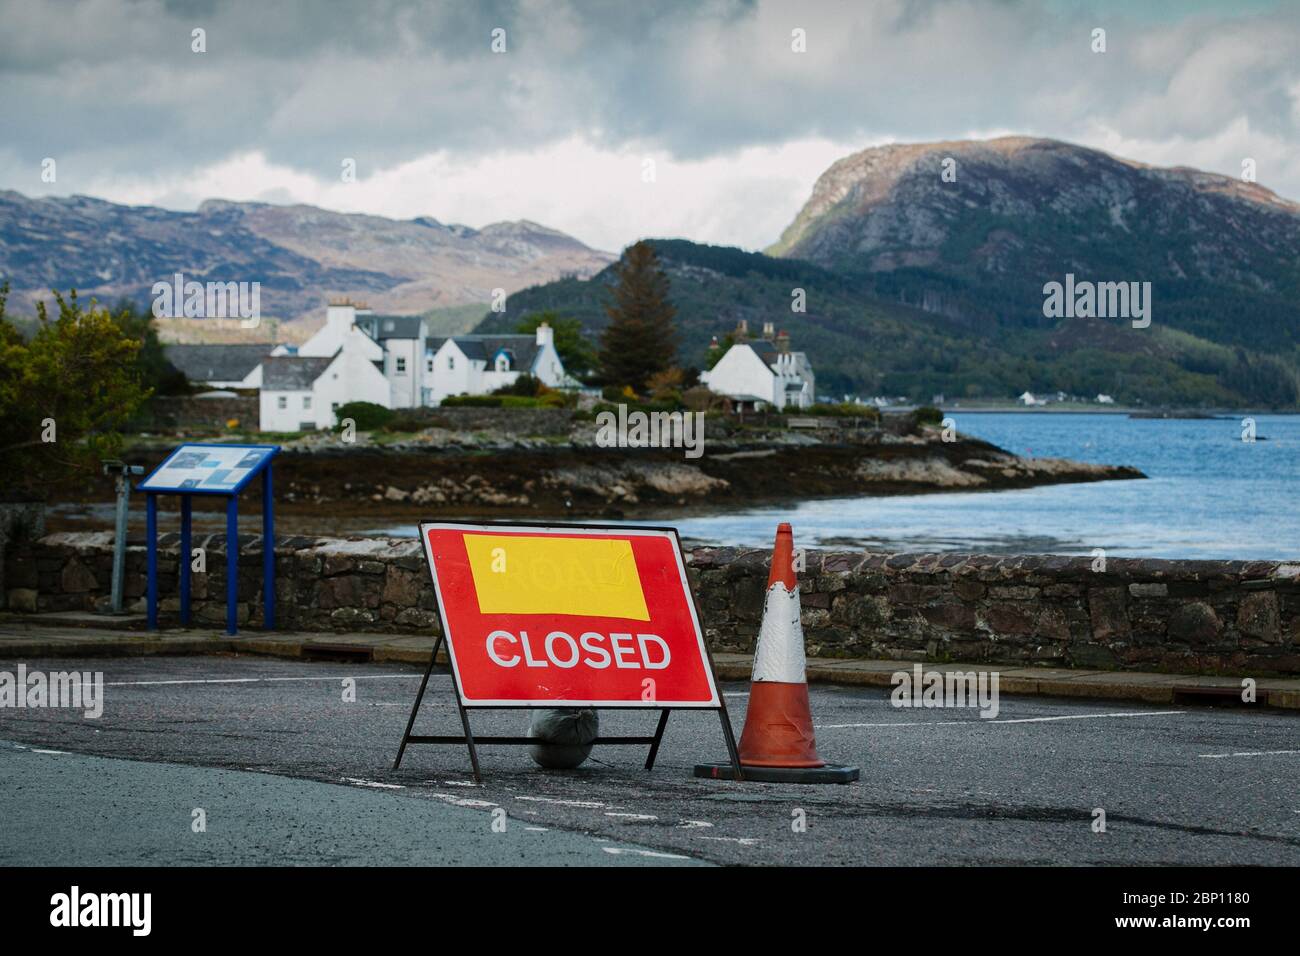 Closed sign in the Highland village of Plockton, where there are no tourists due to the Coronavirus pandemic lockdown. Stock Photo